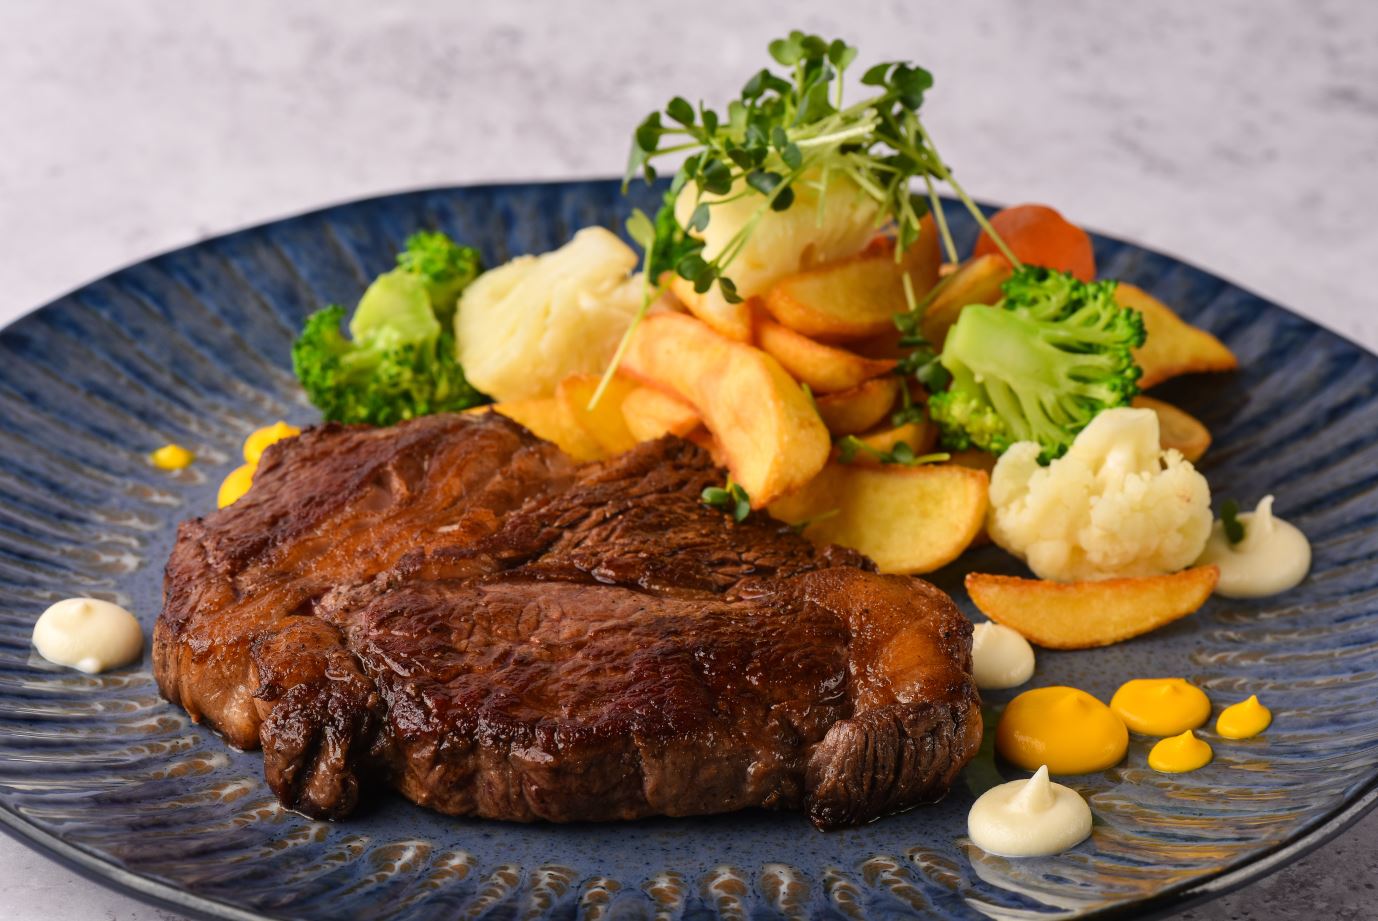 Rib eye steak with selected vegetables and potatoes